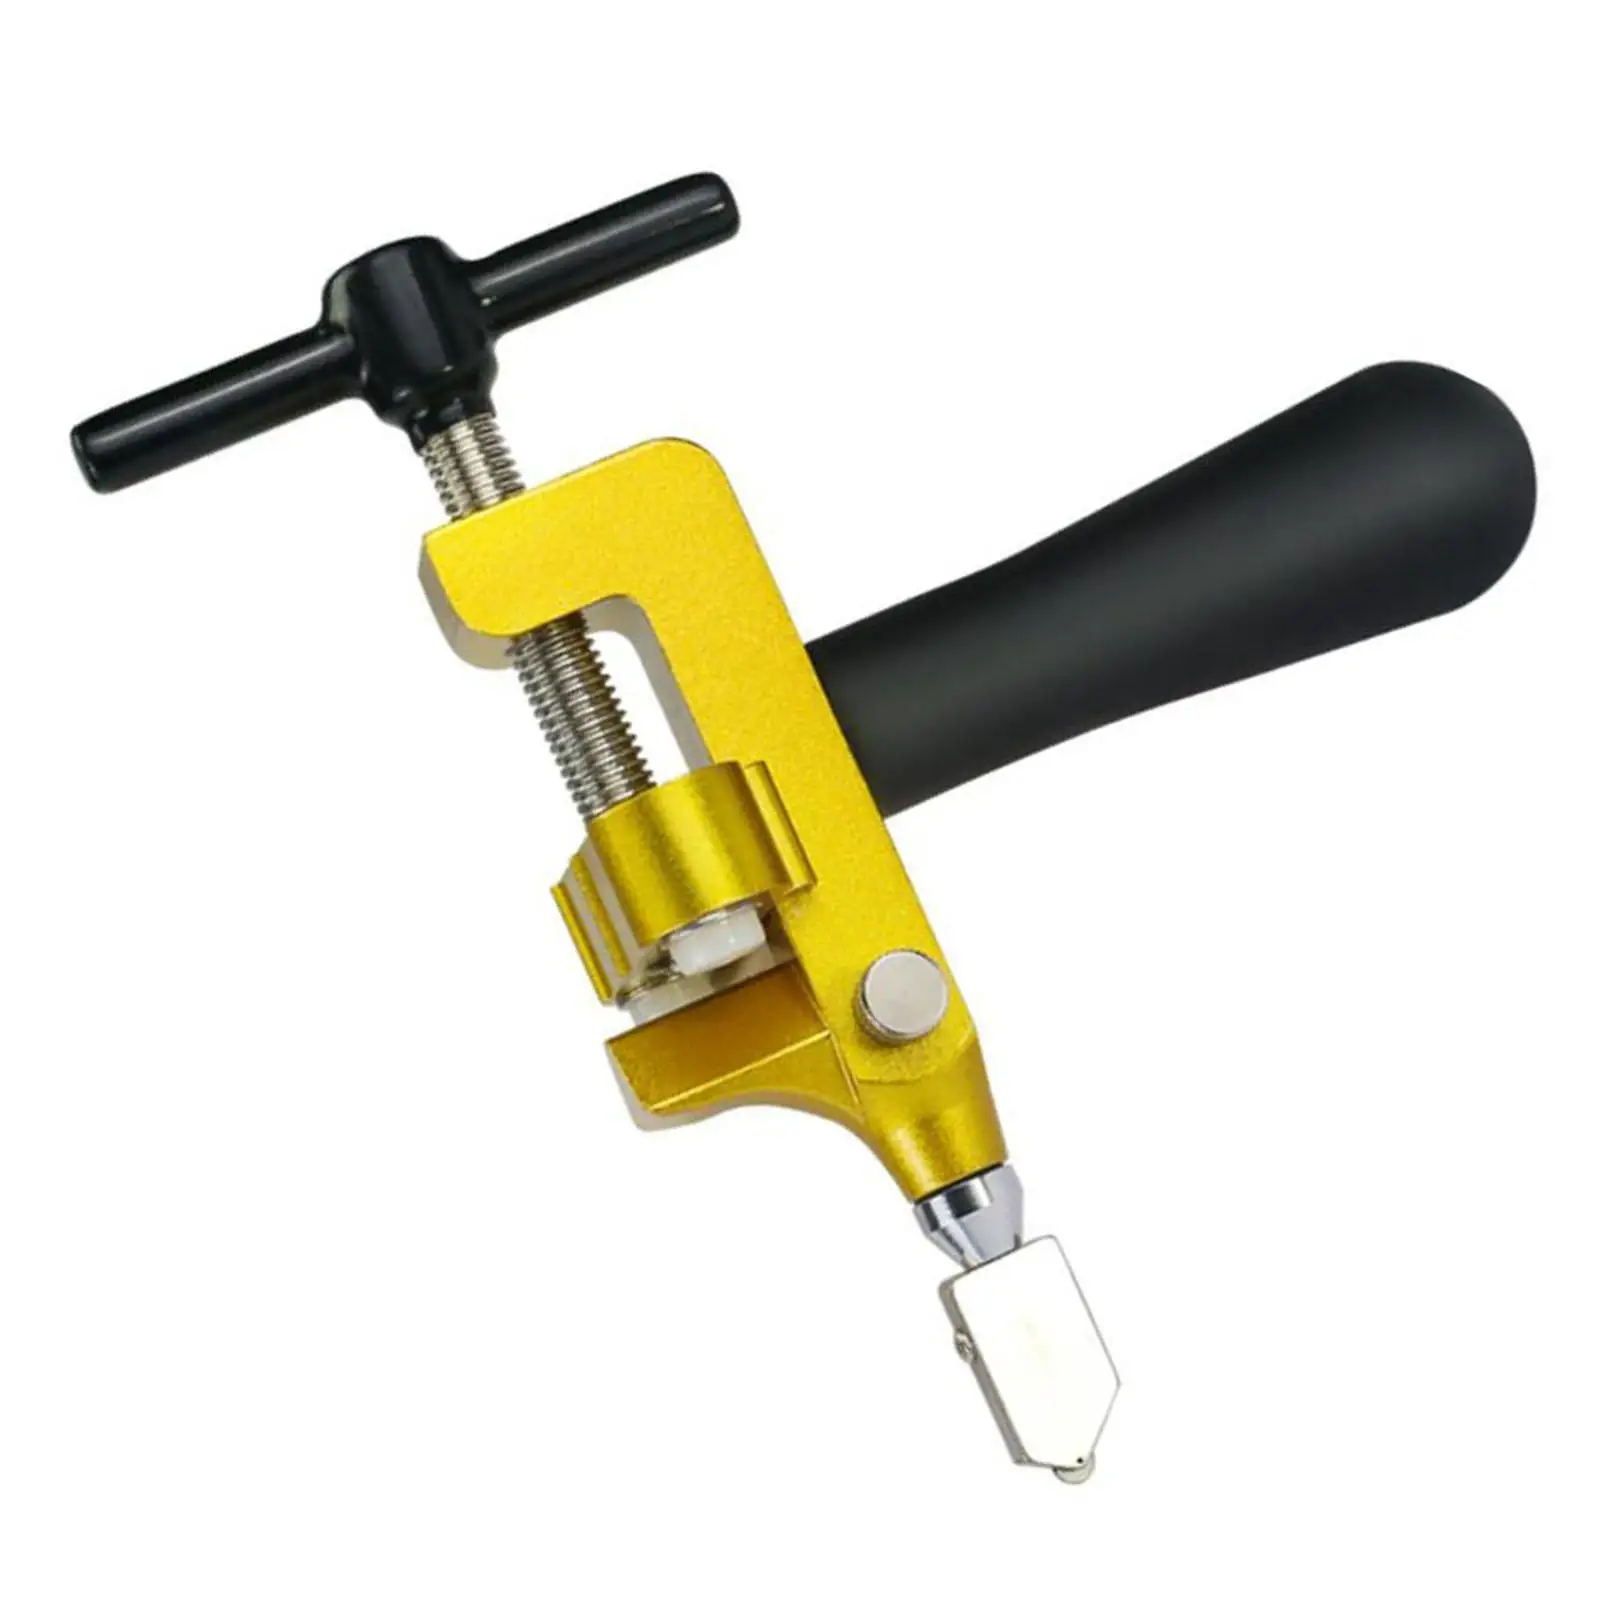 Portable Glass Cutter Cutting Machine Opener Breaker Tools Breaking Pliers Ceramic Tile Cutter for Glazed Tiles Mirror Glass